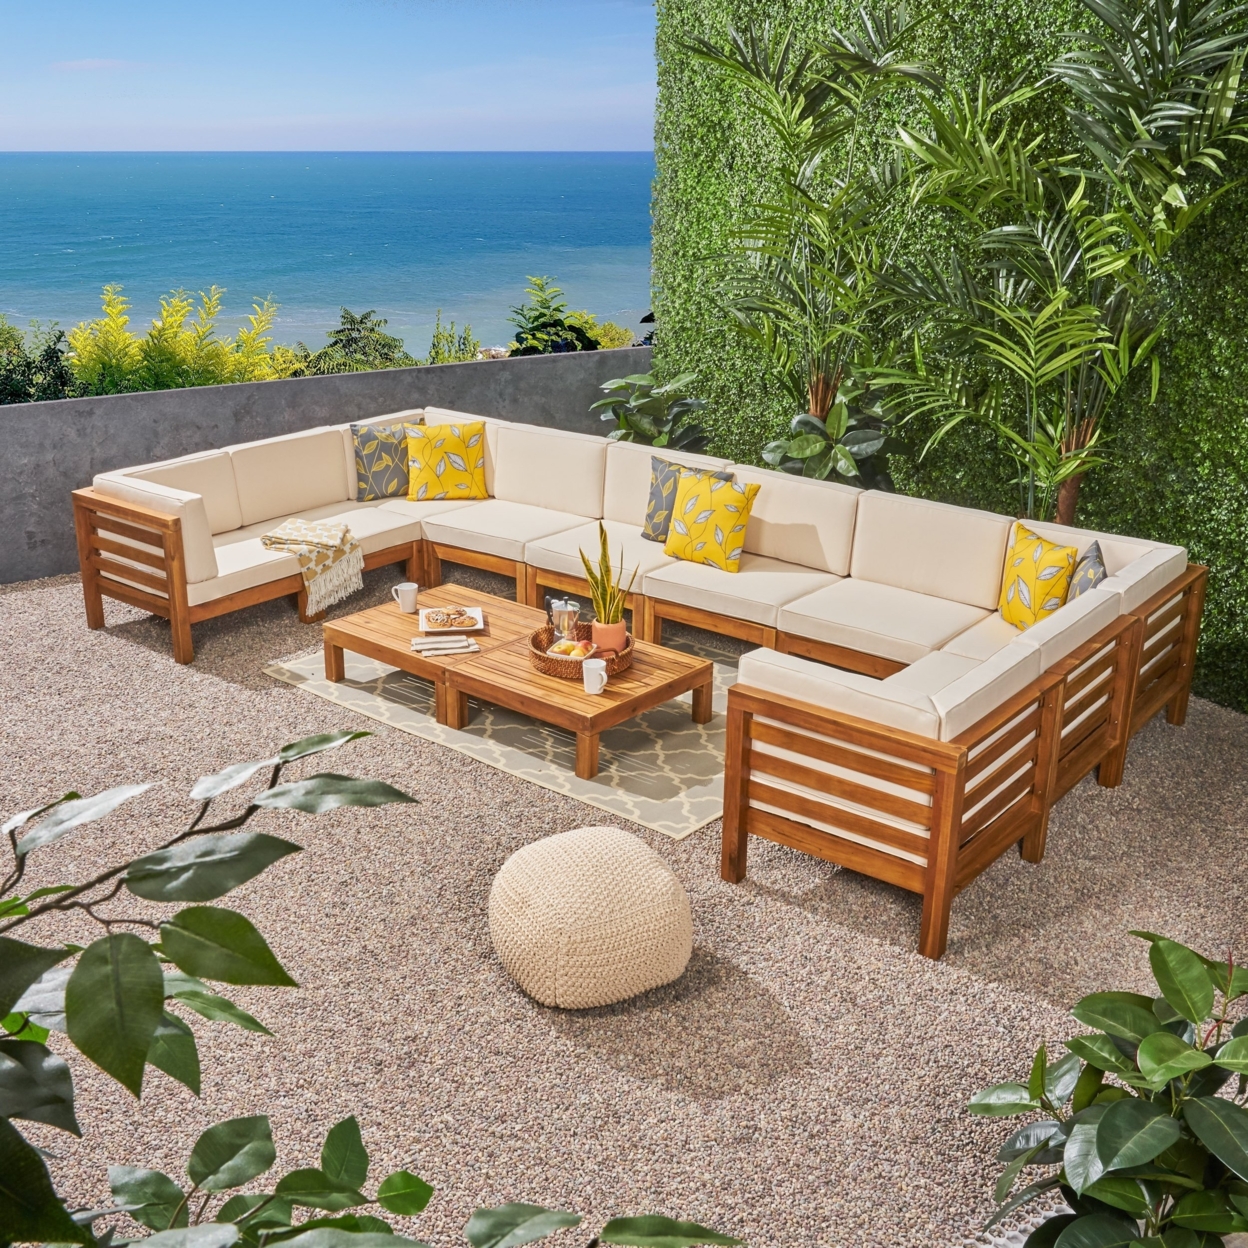 Ravello Outdoor U-Shaped Sectional Sofa Set With Coffee Tables - Weathered Gray / Dark Gray